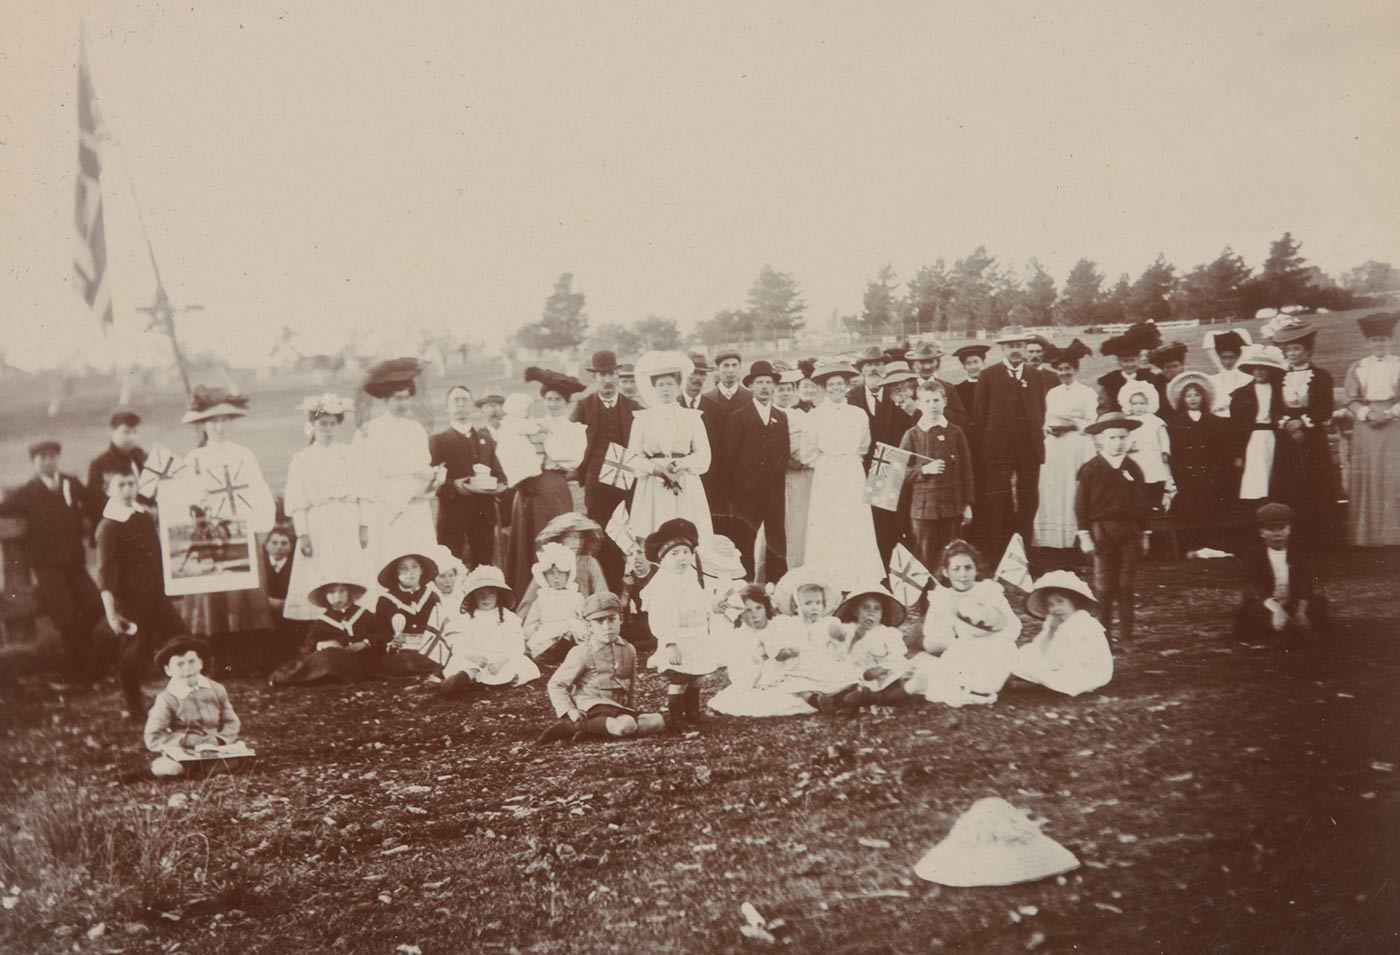 Black and white photo showing a group of people including many children at front. Some of the crowd holds flags. - click to view larger image